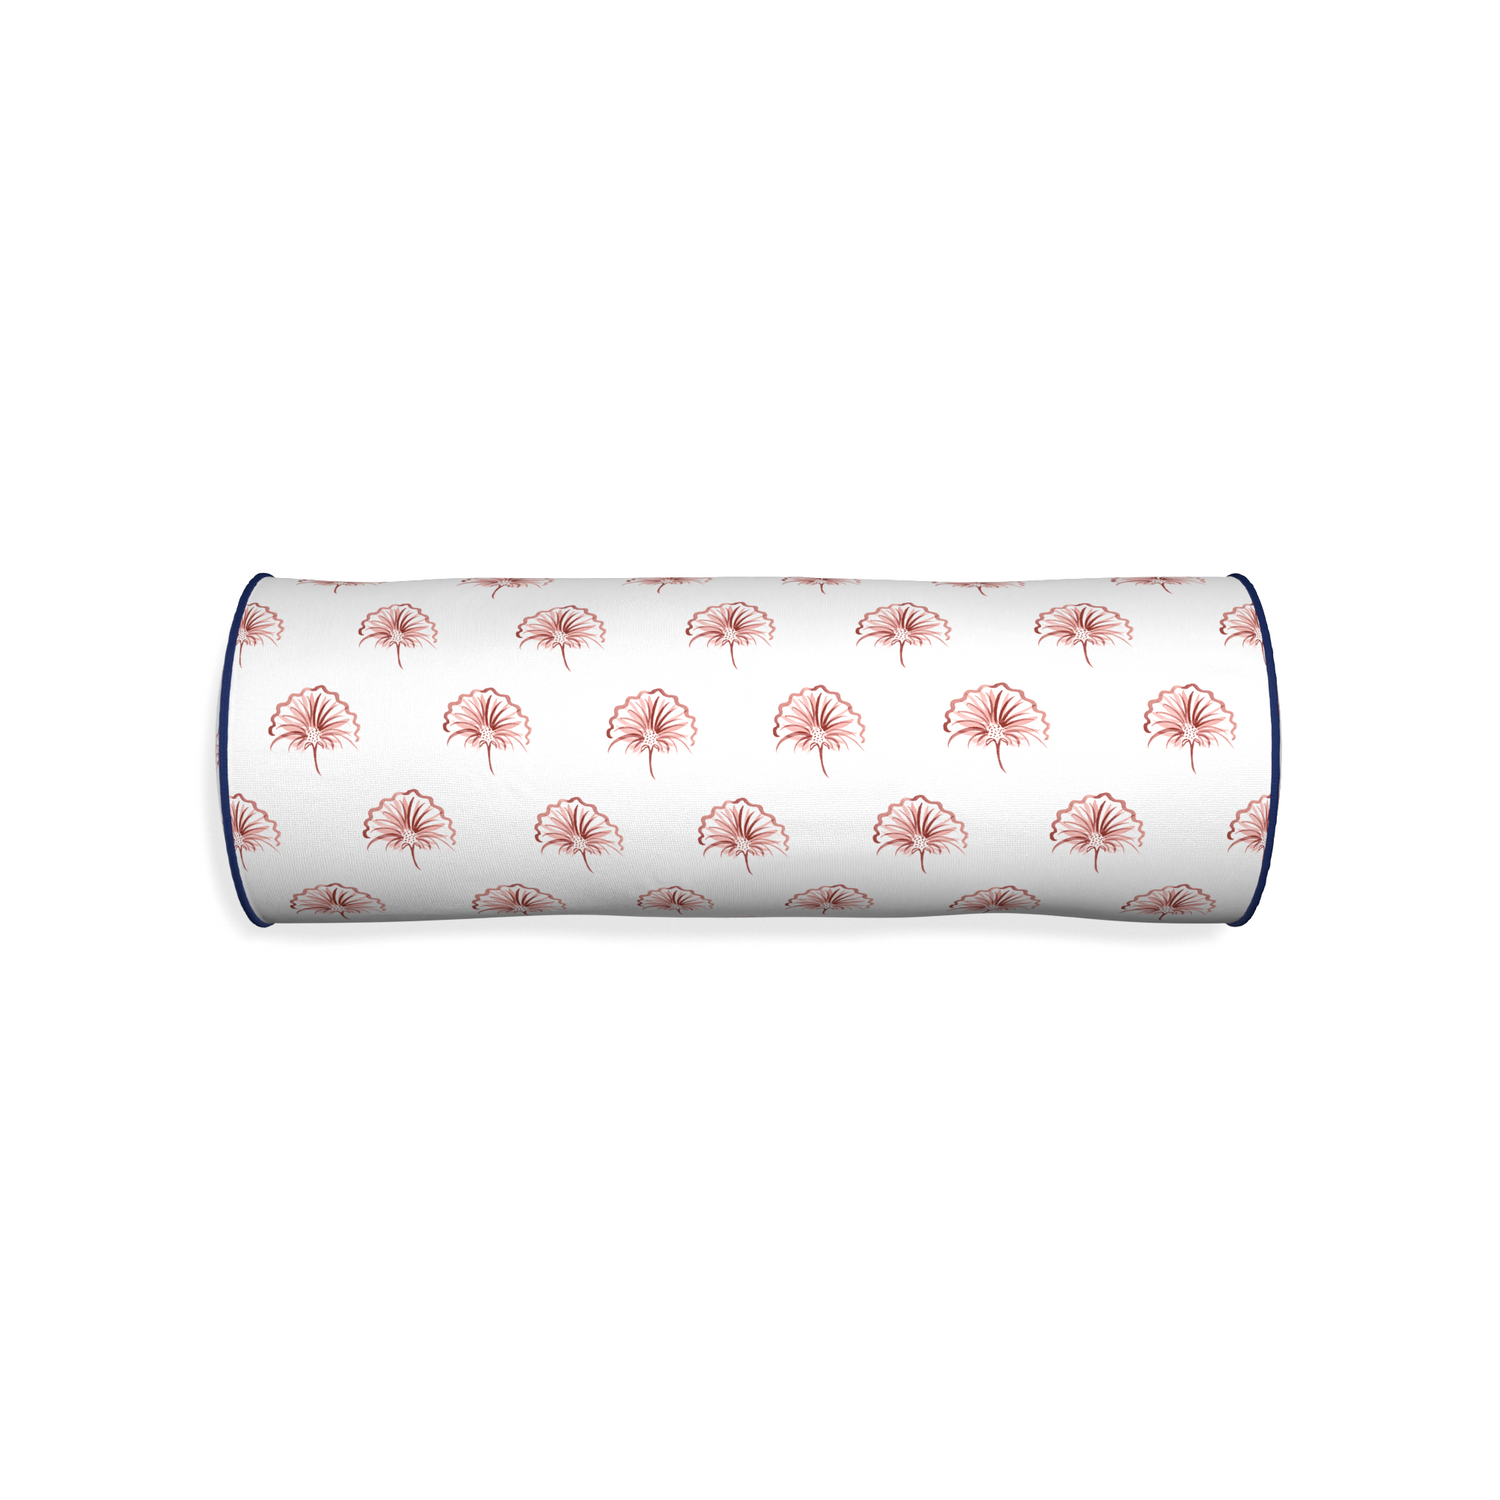 Bolster penelope rose custom floral pinkpillow with midnight piping on white background